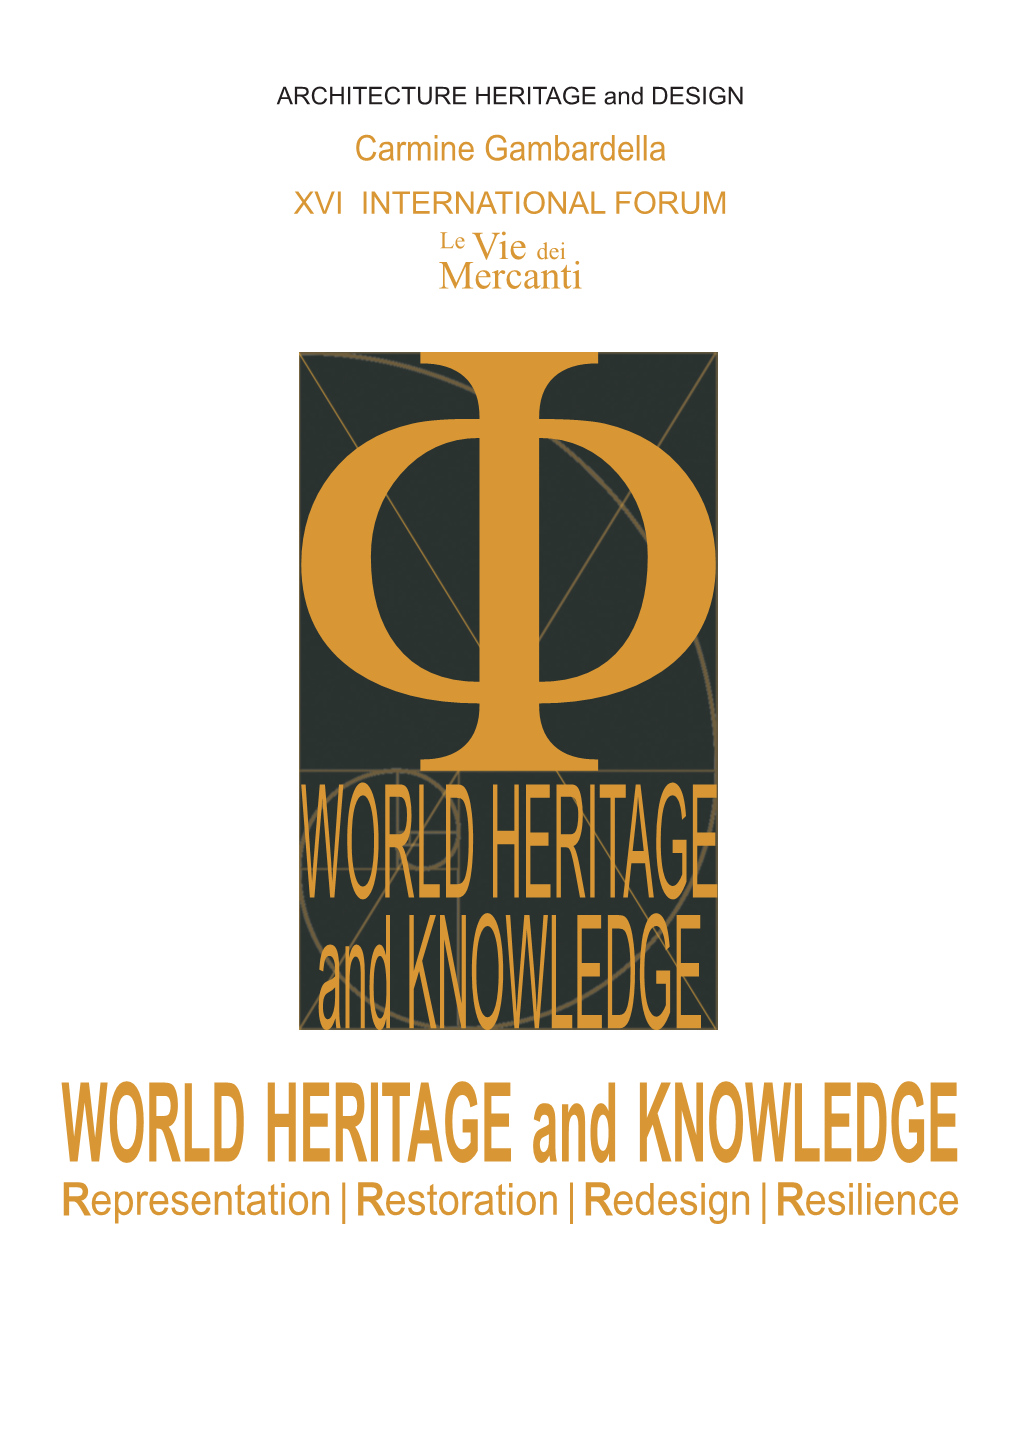 WORLD HERITAGE and KNOWLEDGE